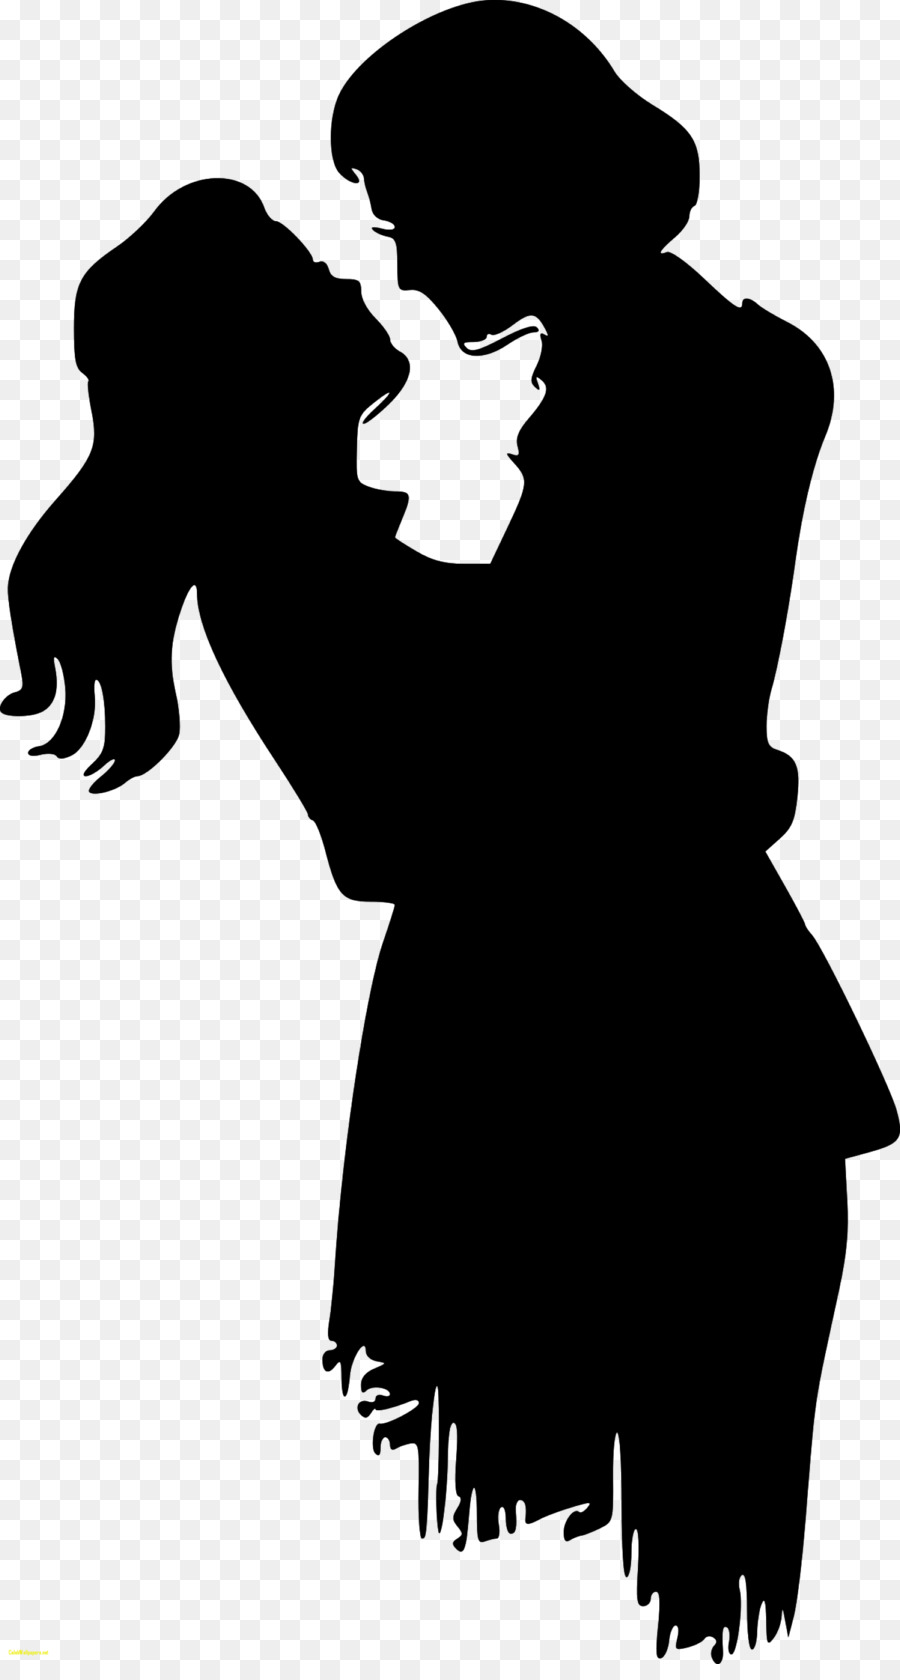 Silhouette Love Line art - couple png download - 1600*2958 - Free Transparent Silhouette png Download.